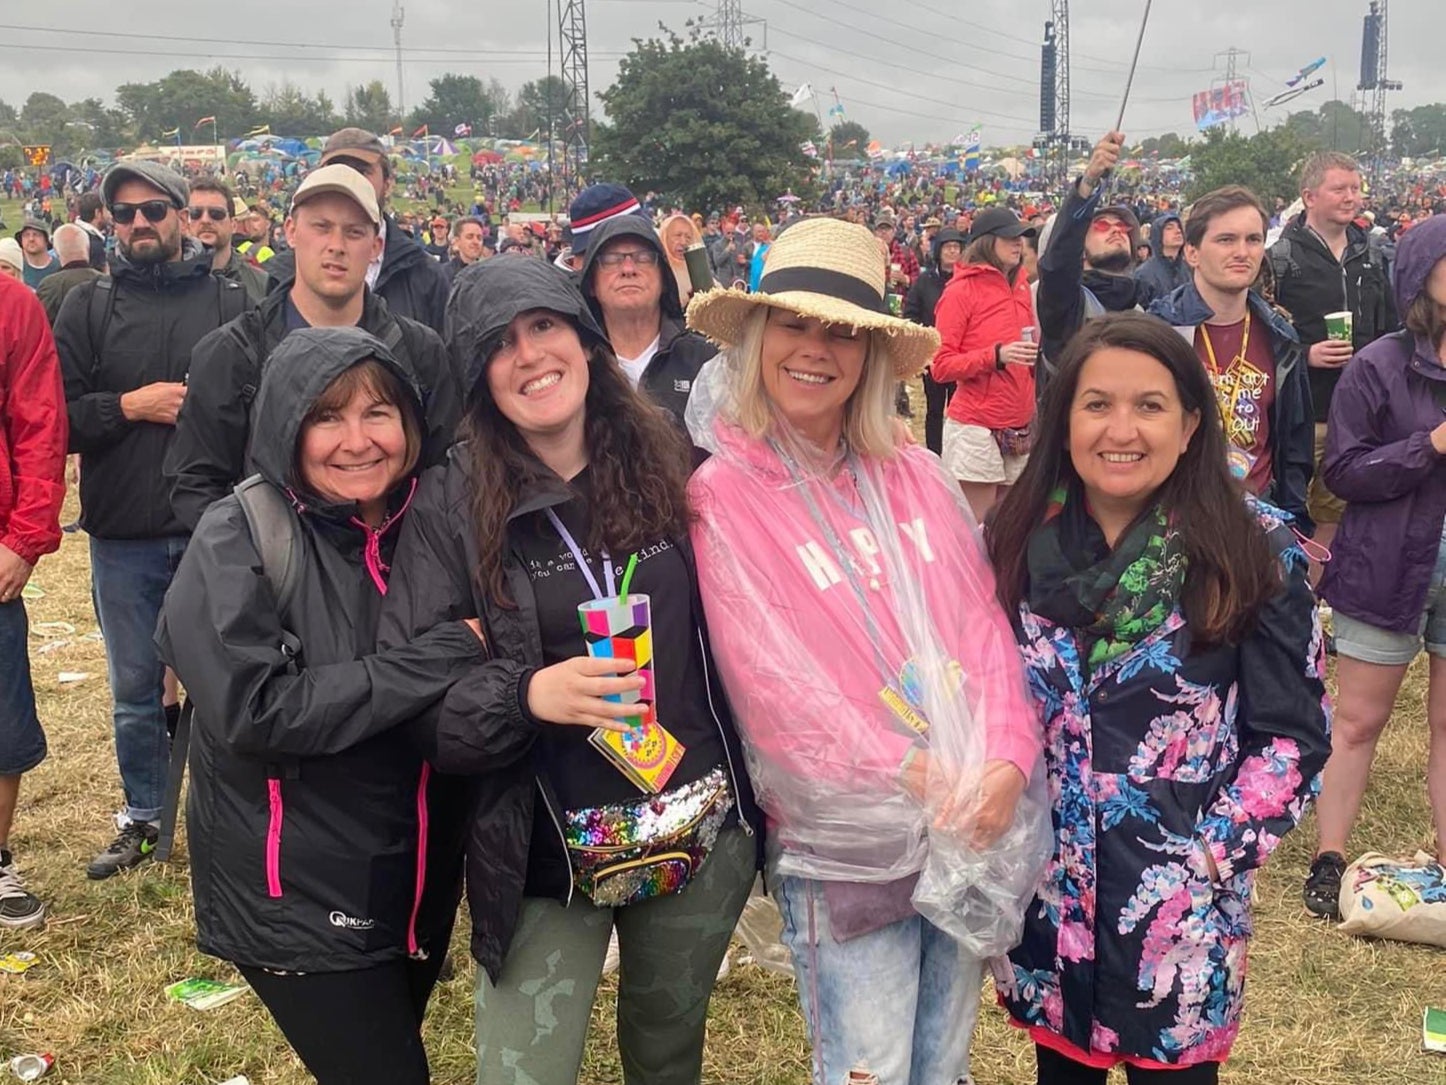 Niki Green and her friends at Glastonbury Festival